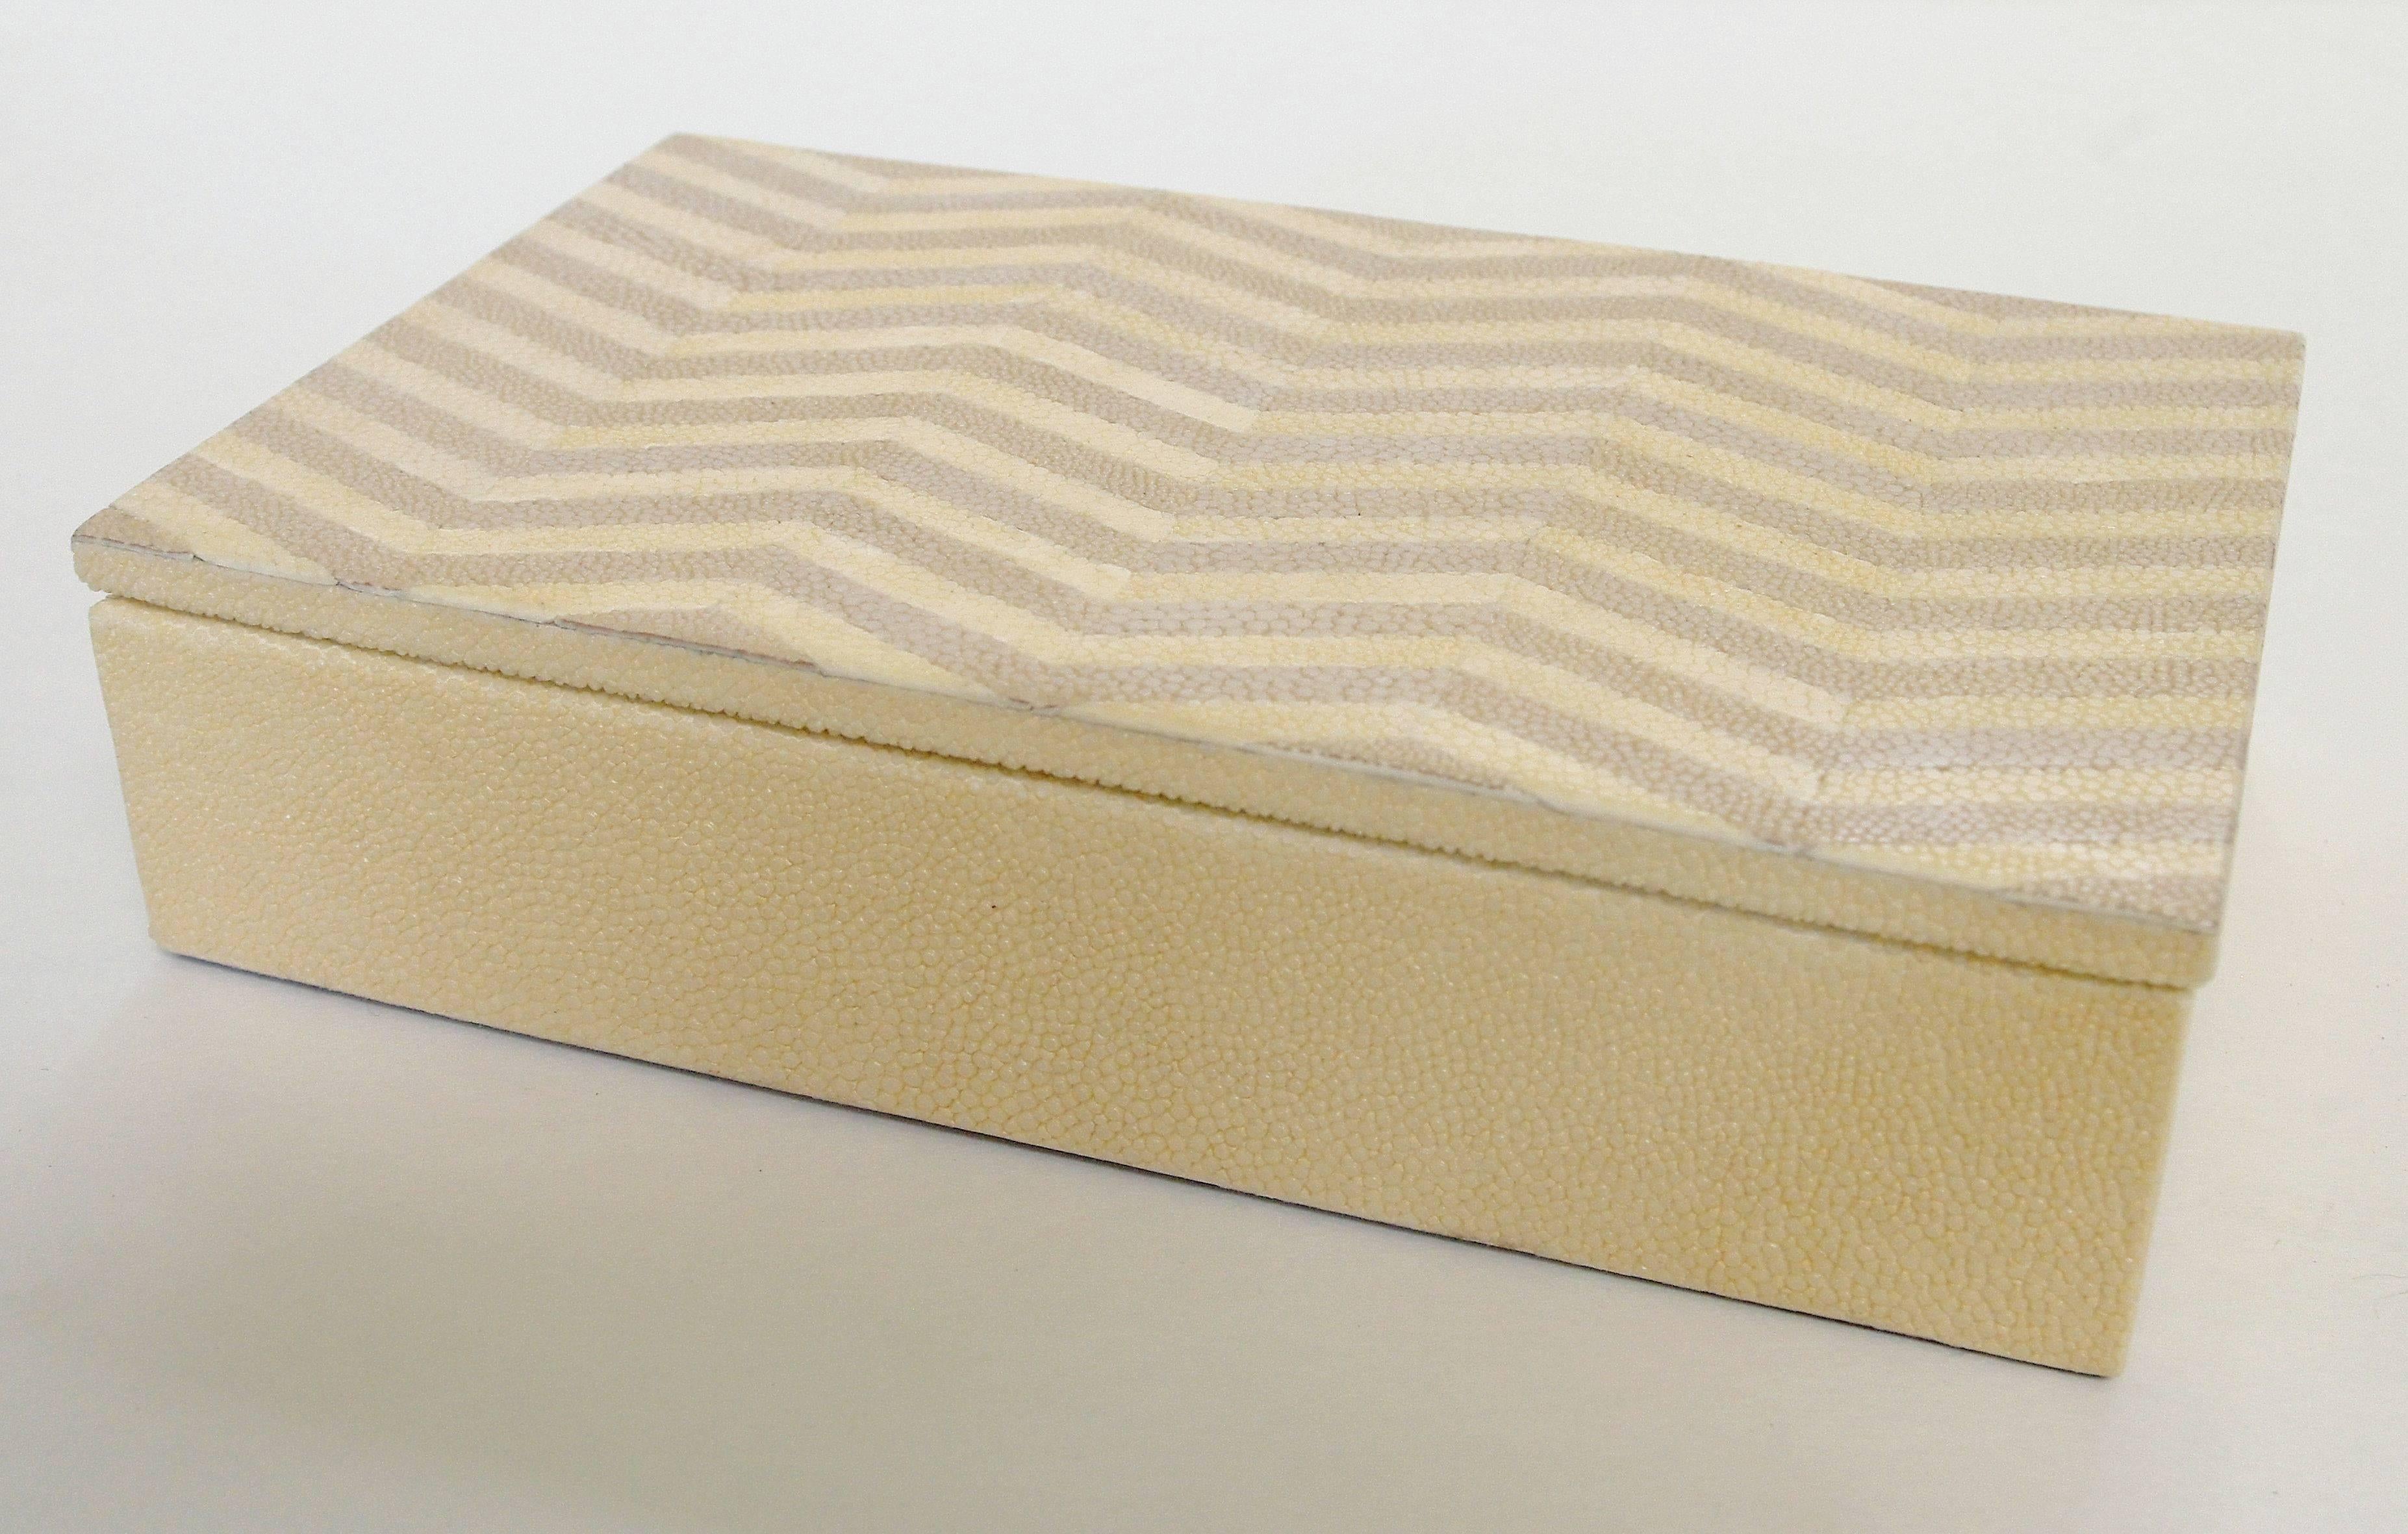 Ivory and brown Shagreen box with zigzag pattern and gray suede interior 
Measures: Depth 5 inches, width 8 inches, height 2 inches.
1 in stock in Palm Springs currently ON SALE for $699!!!
Order Reference #: MR62
This piece makes for great and